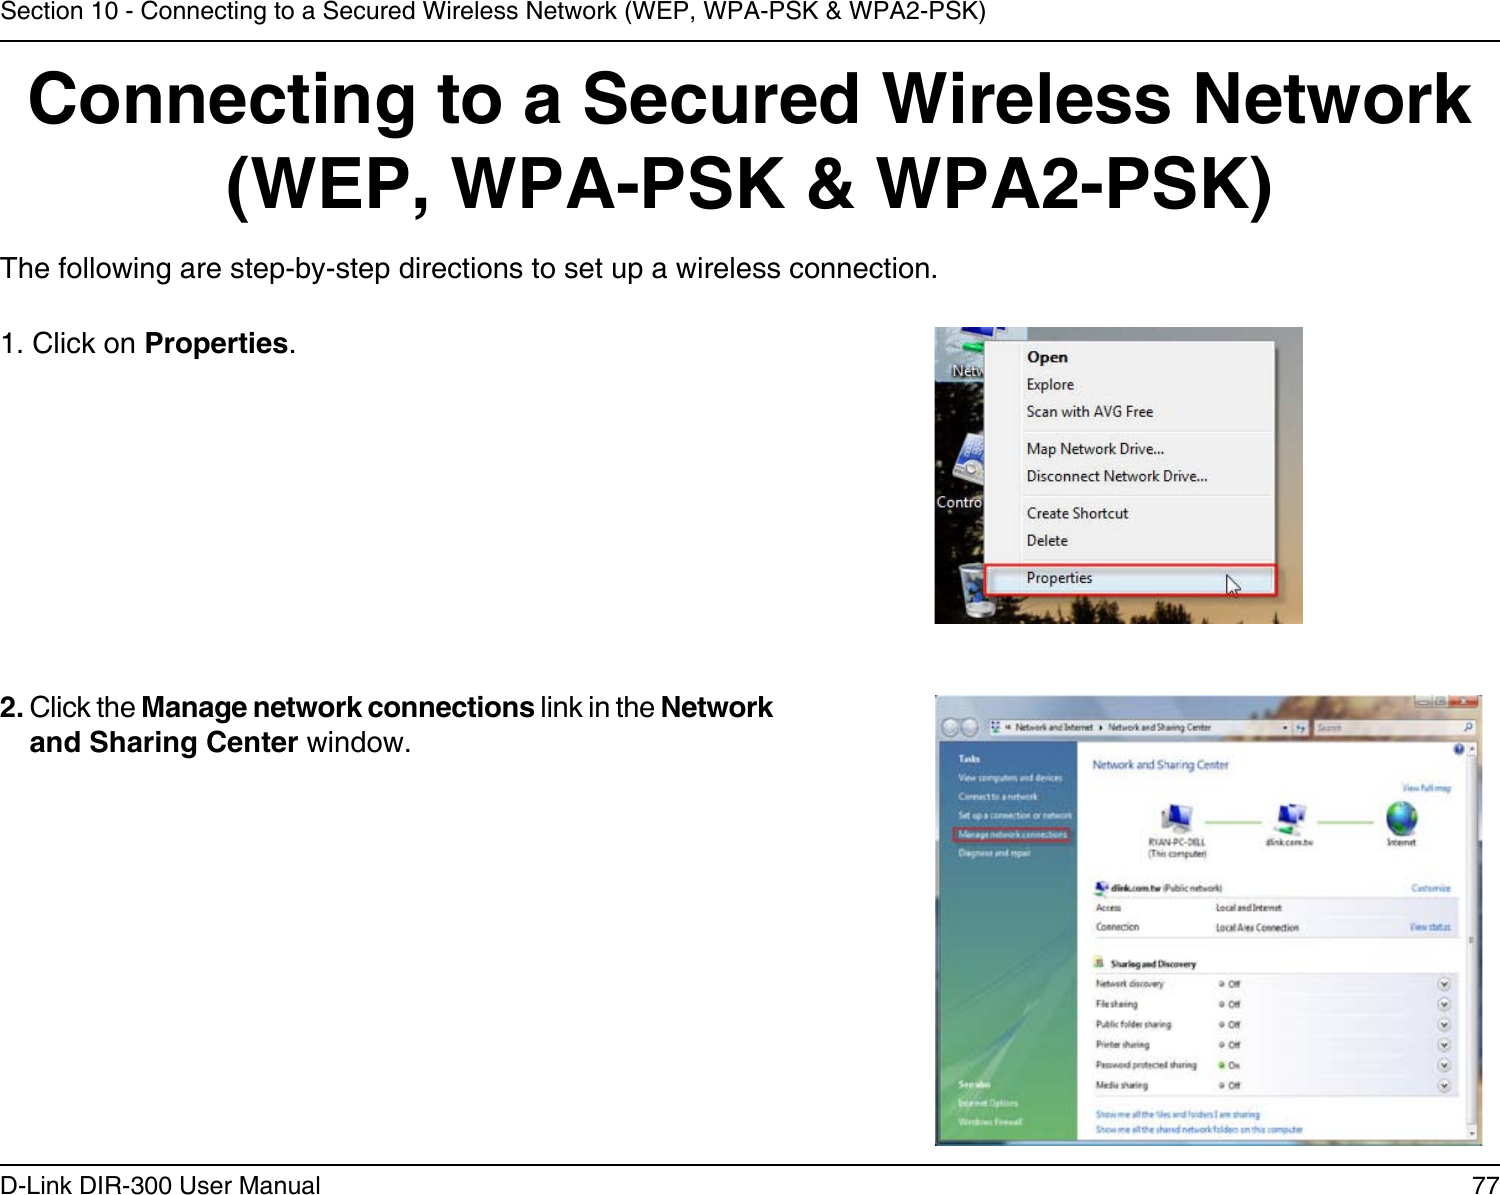 77D-Link DIR-300 User ManualSection 10 - Connecting to a Secured Wireless Network (WEP, WPA-PSK &amp; WPA2-PSK)Connecting to a Secured Wireless Network (WEP, WPA-PSK &amp; WPA2-PSK)The following are step-by-step directions to set up a wireless connection.2. Click the Manage network connections link in the Network and Sharing Center window. 1. Click on Properties.     